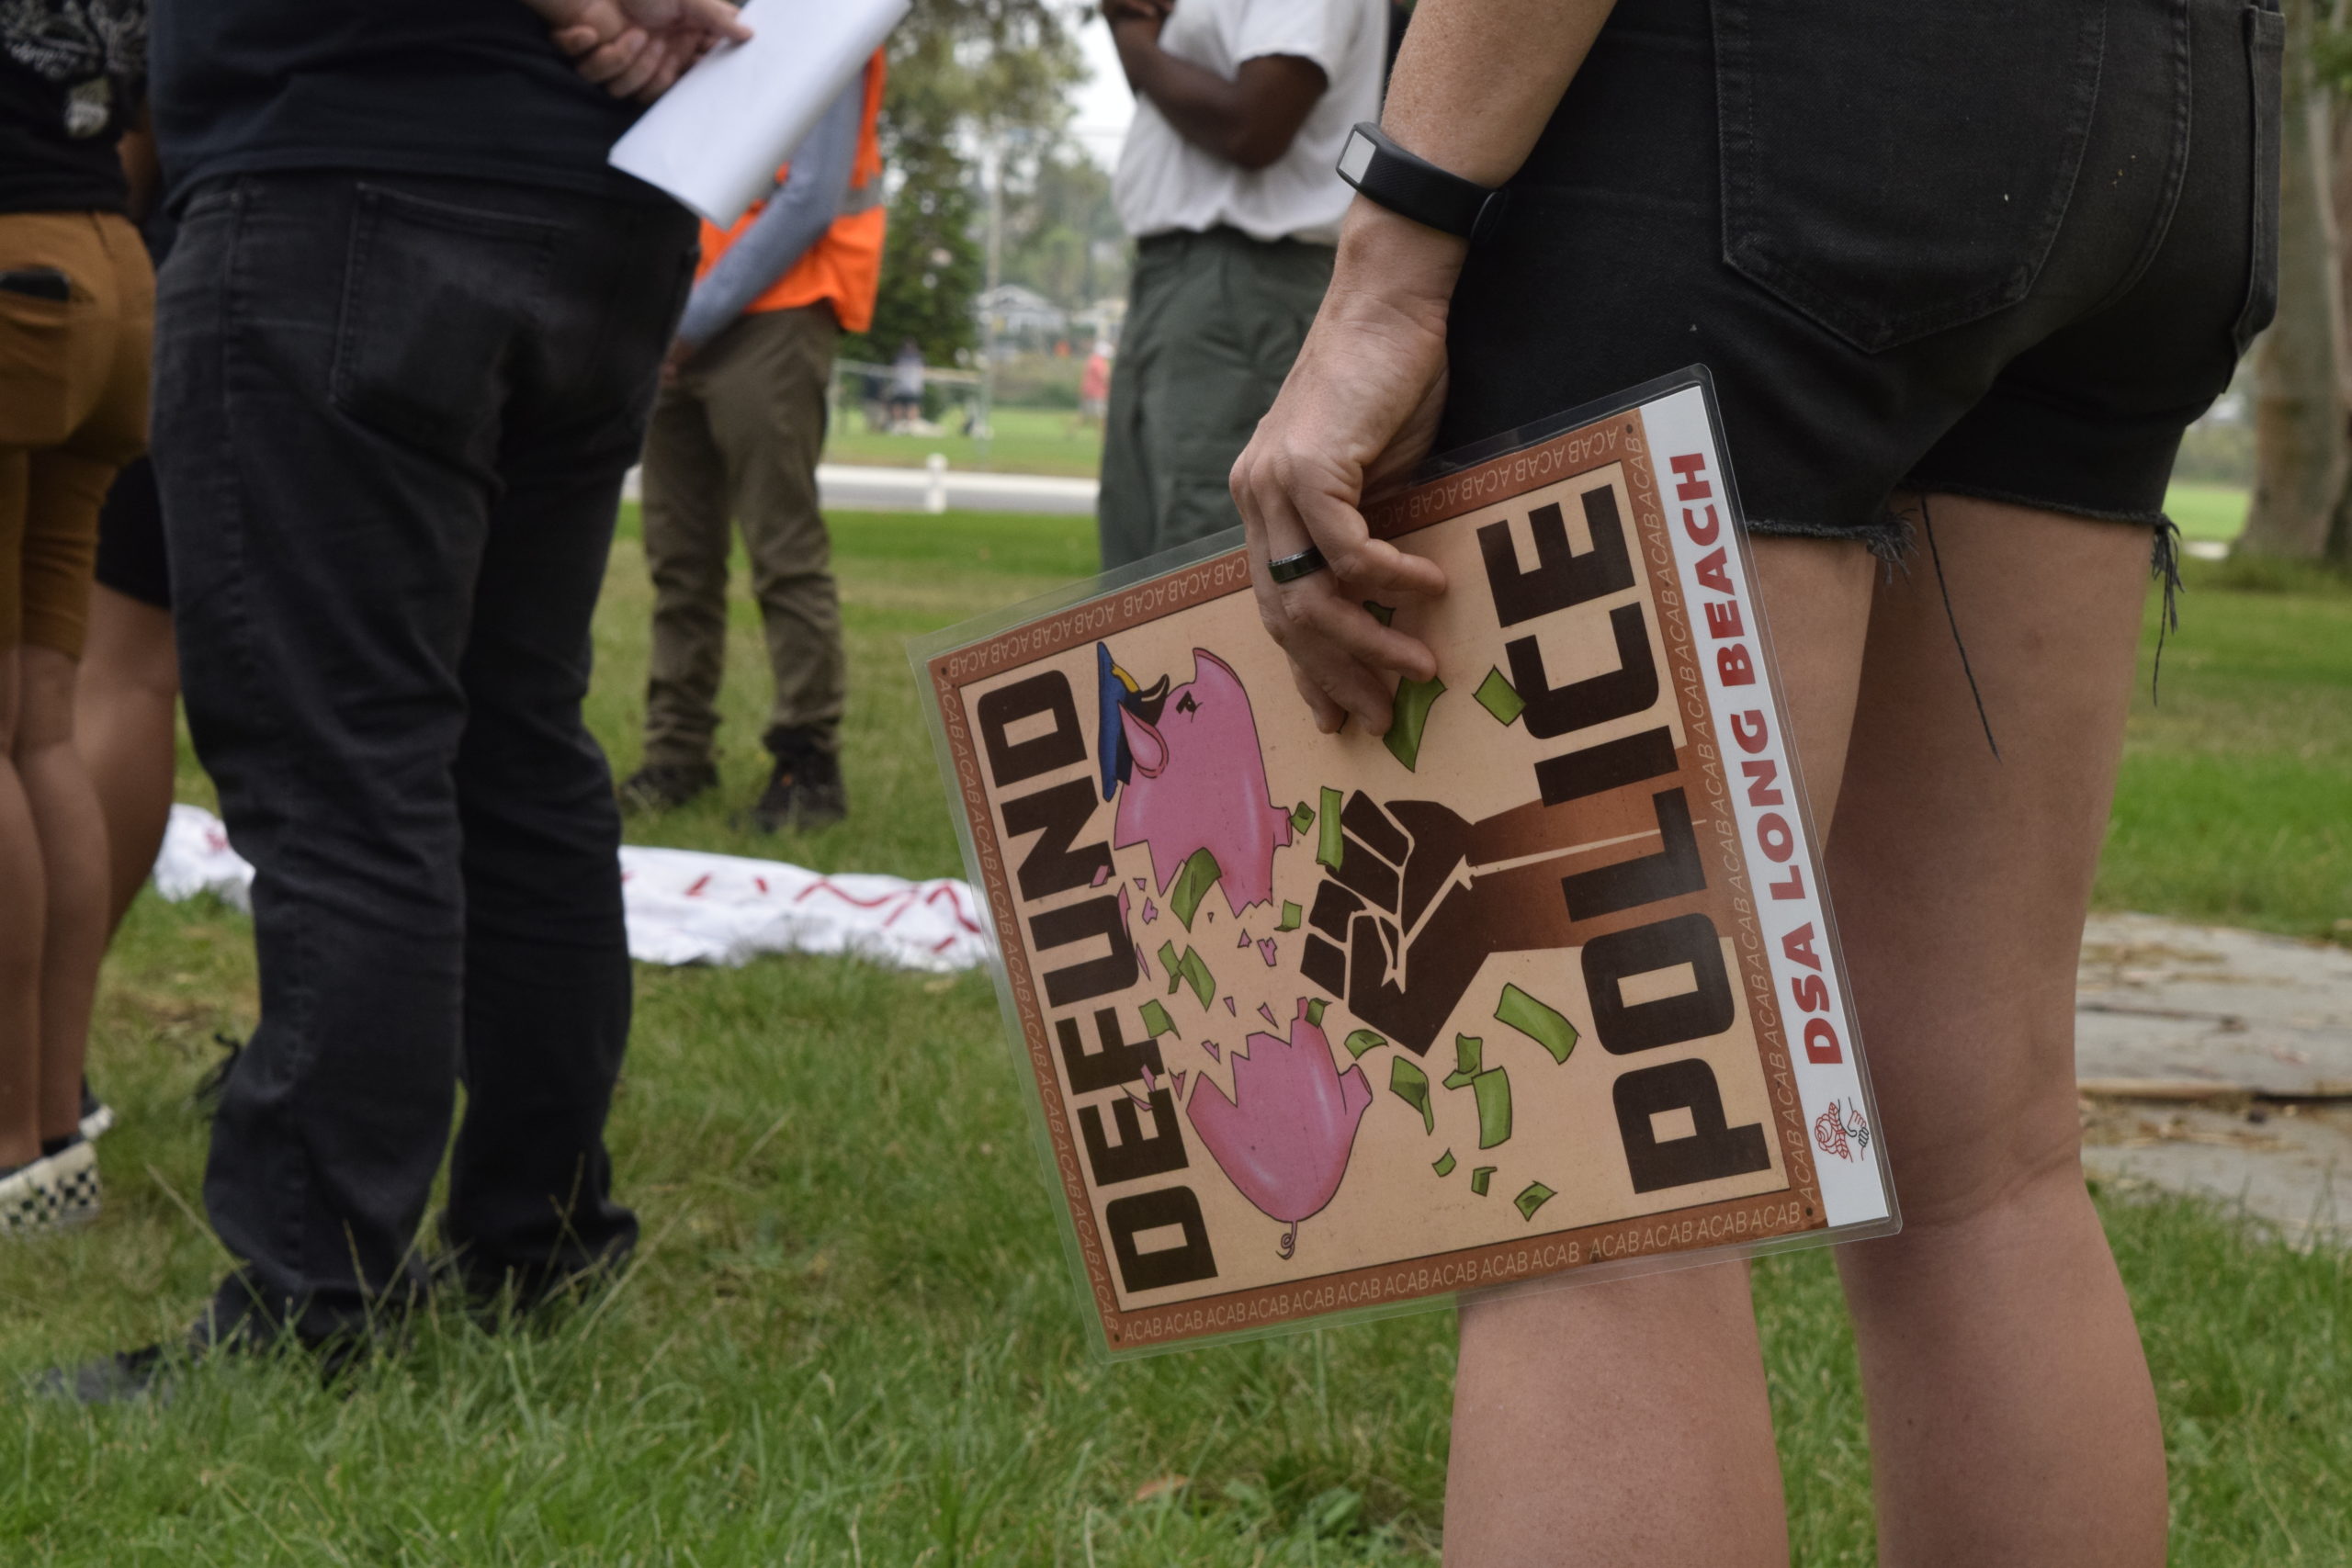 A protester holding a sign that reads "Defund the Police"